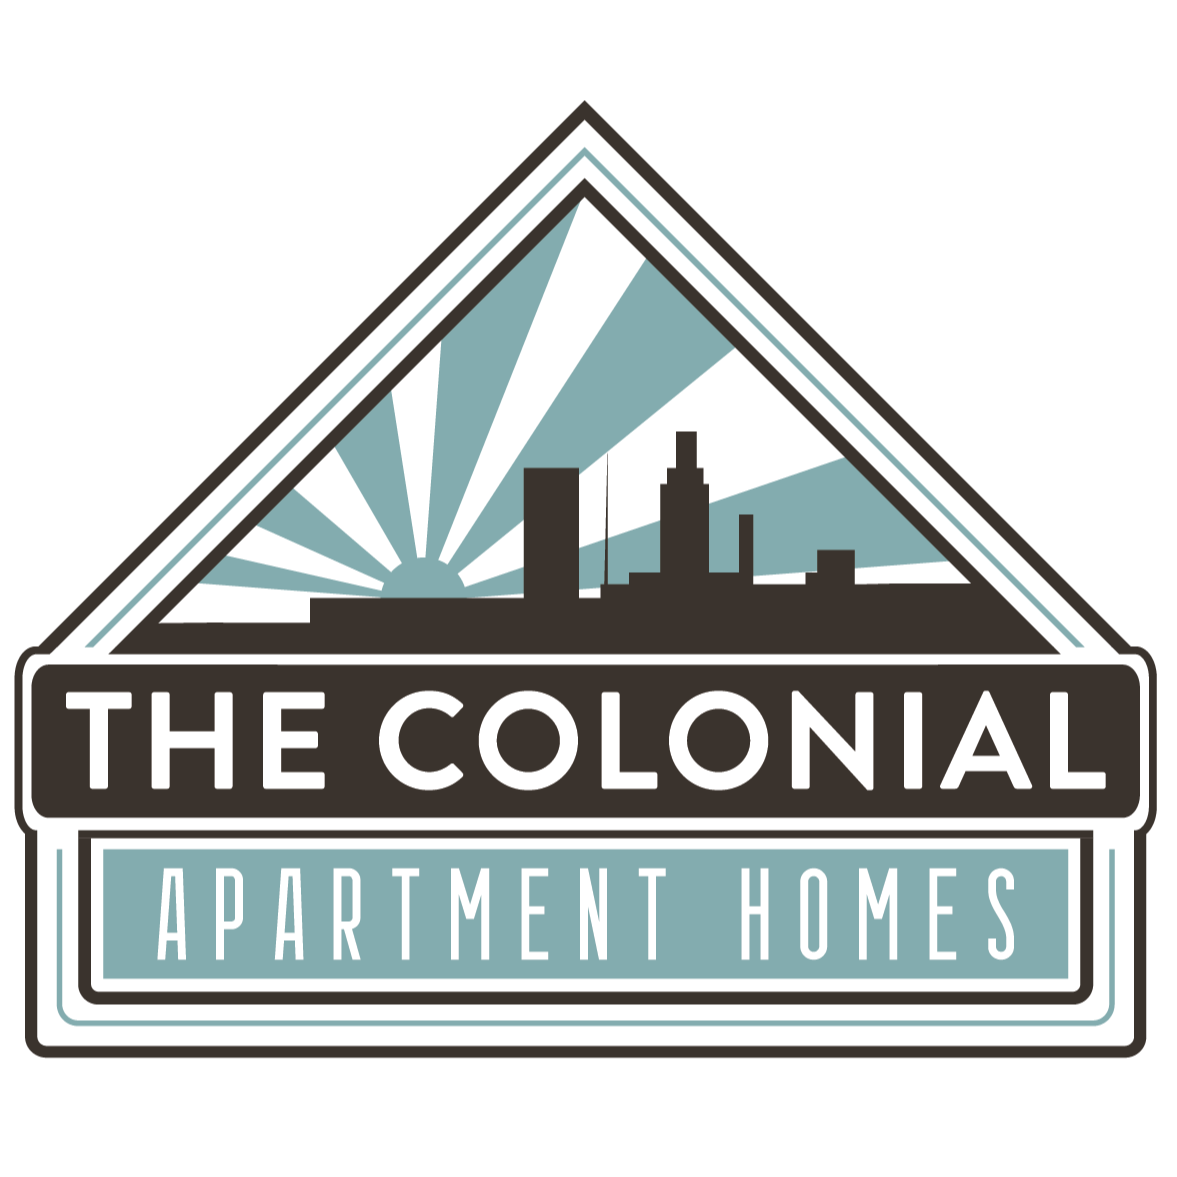 The Colonial Apartment Homes